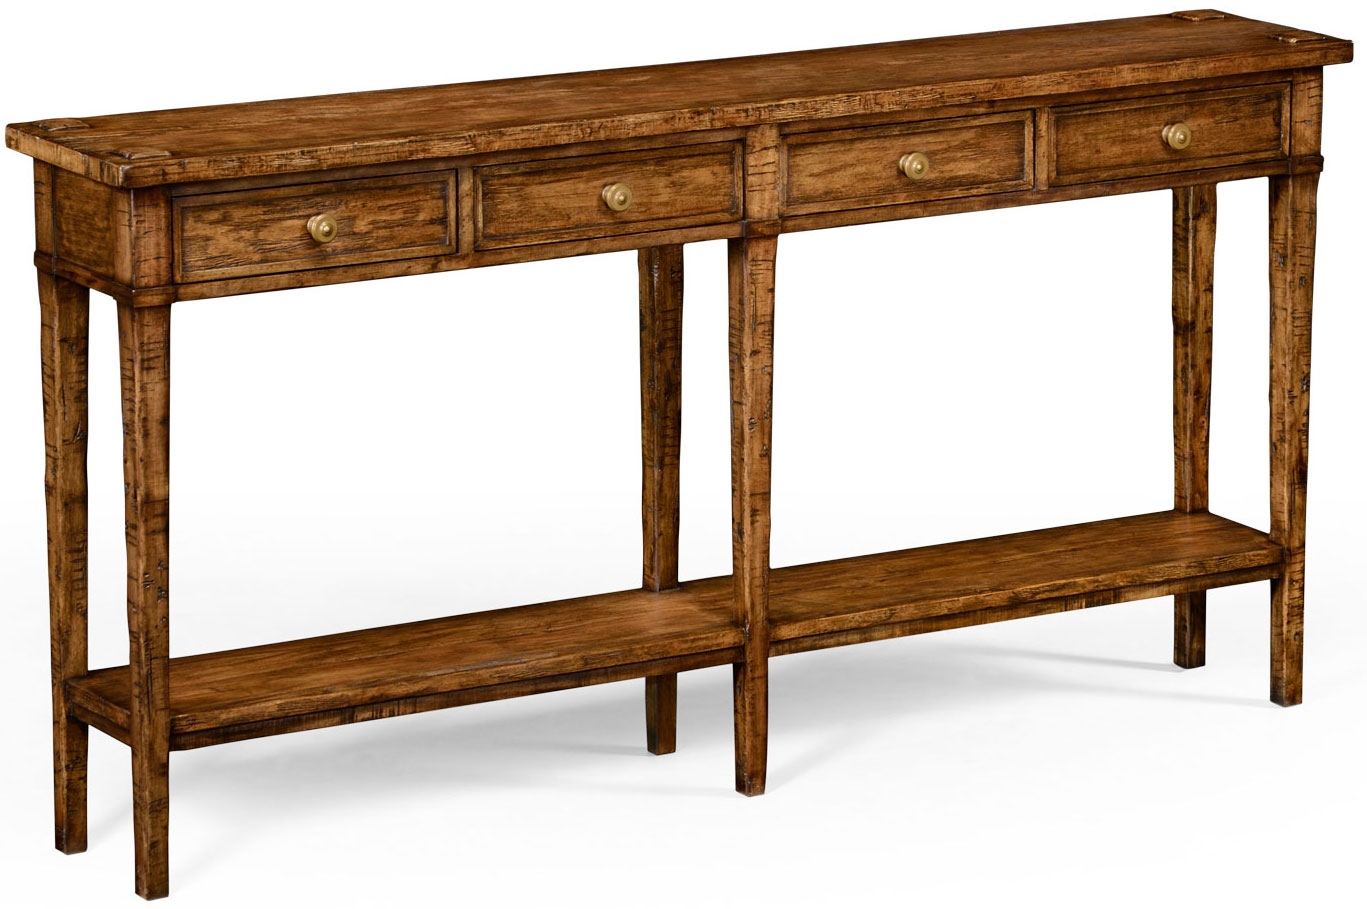 Console & Sofa Tables Country living style walnut four drawer console table.